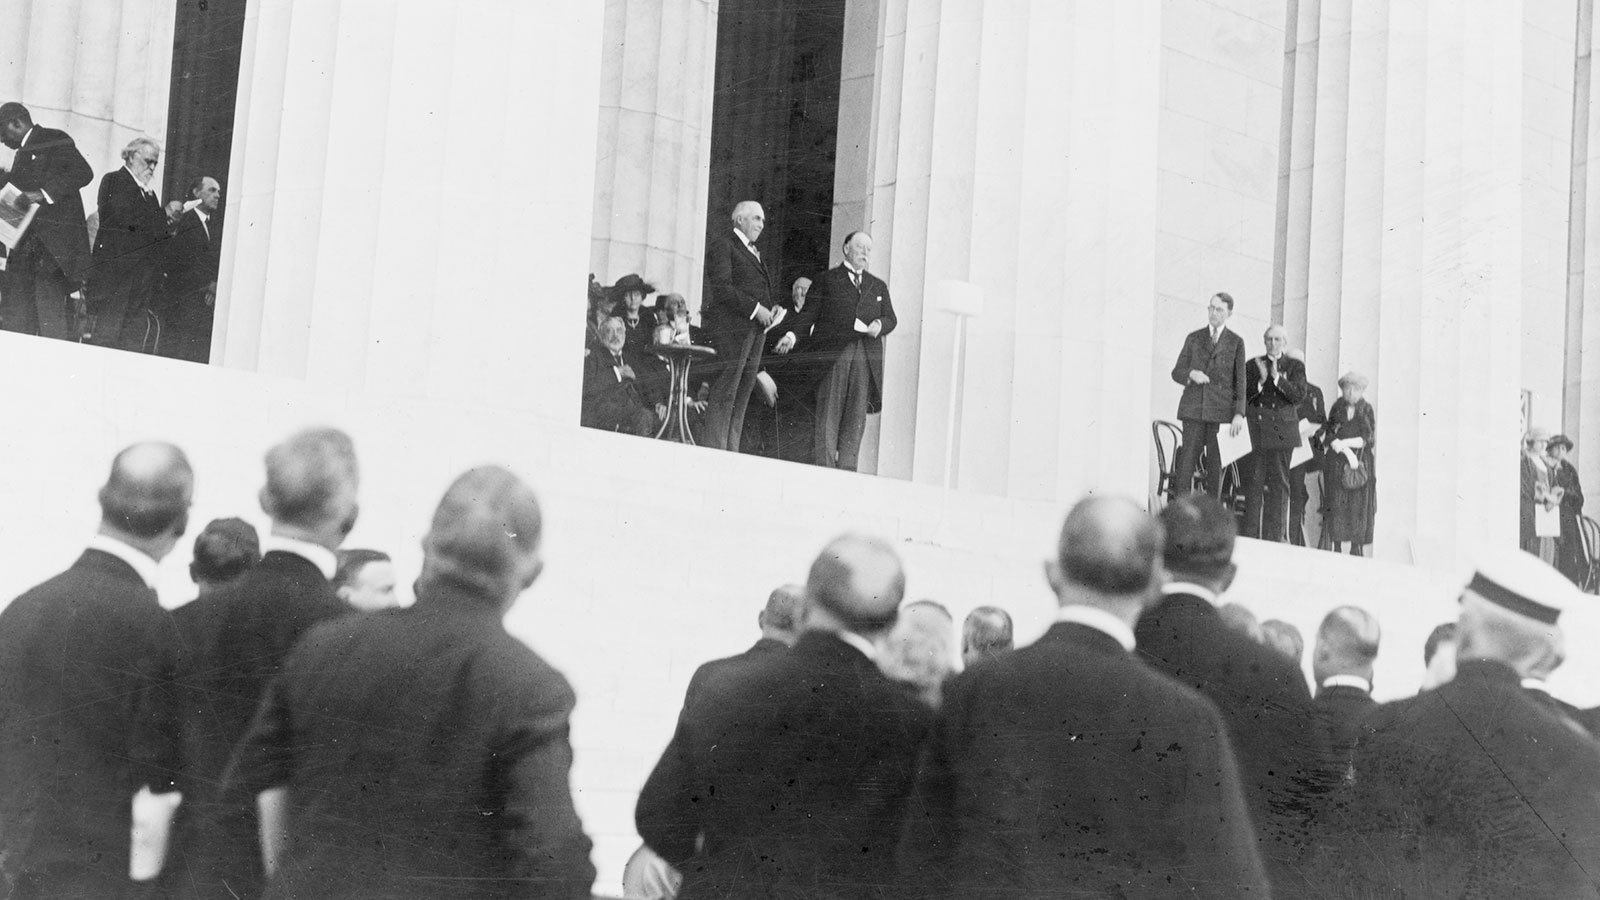 Chief Justice William H. Taft turning over the memorial and President Warren G. Harding receiving it on behalf of the United States